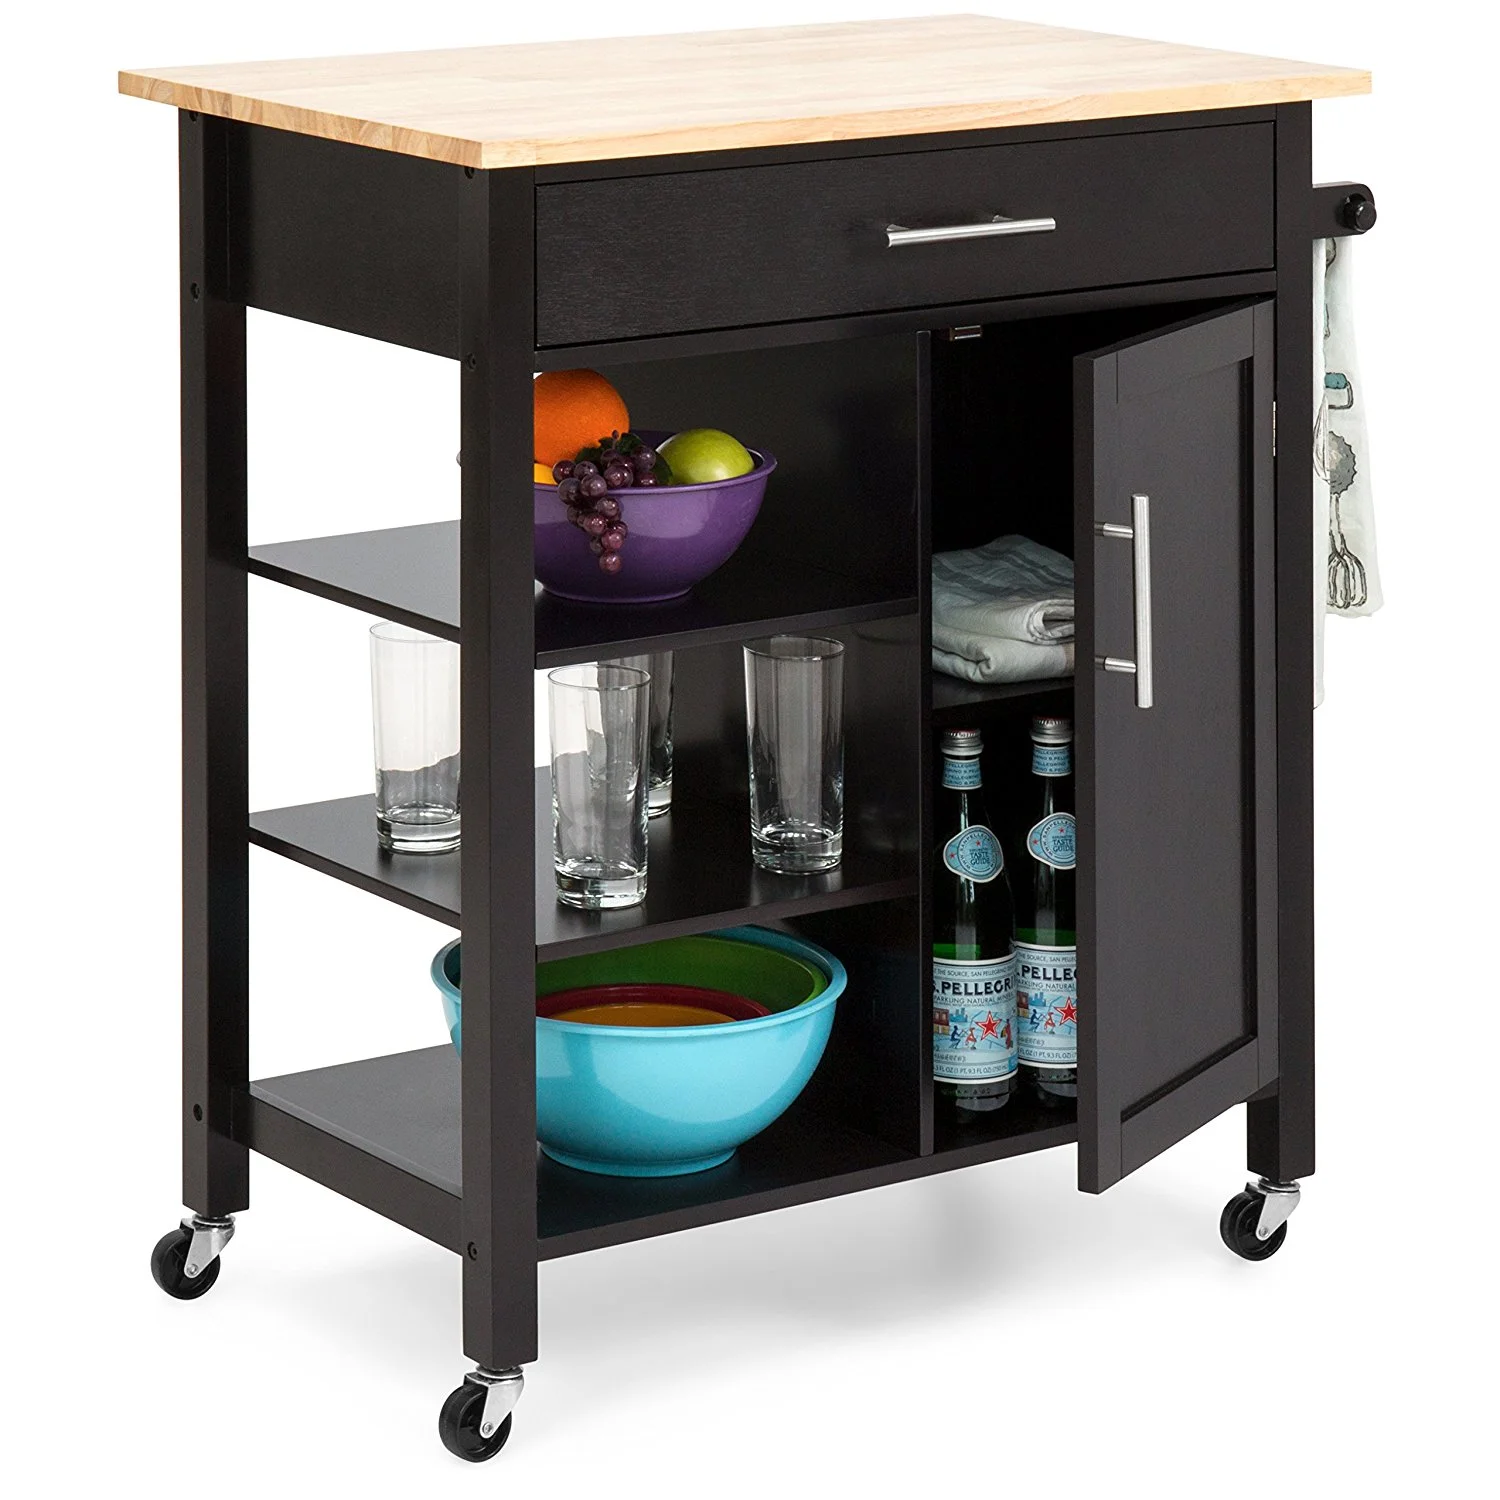 High quality simple multi-layer to move casters service kitchen trolley with drawers